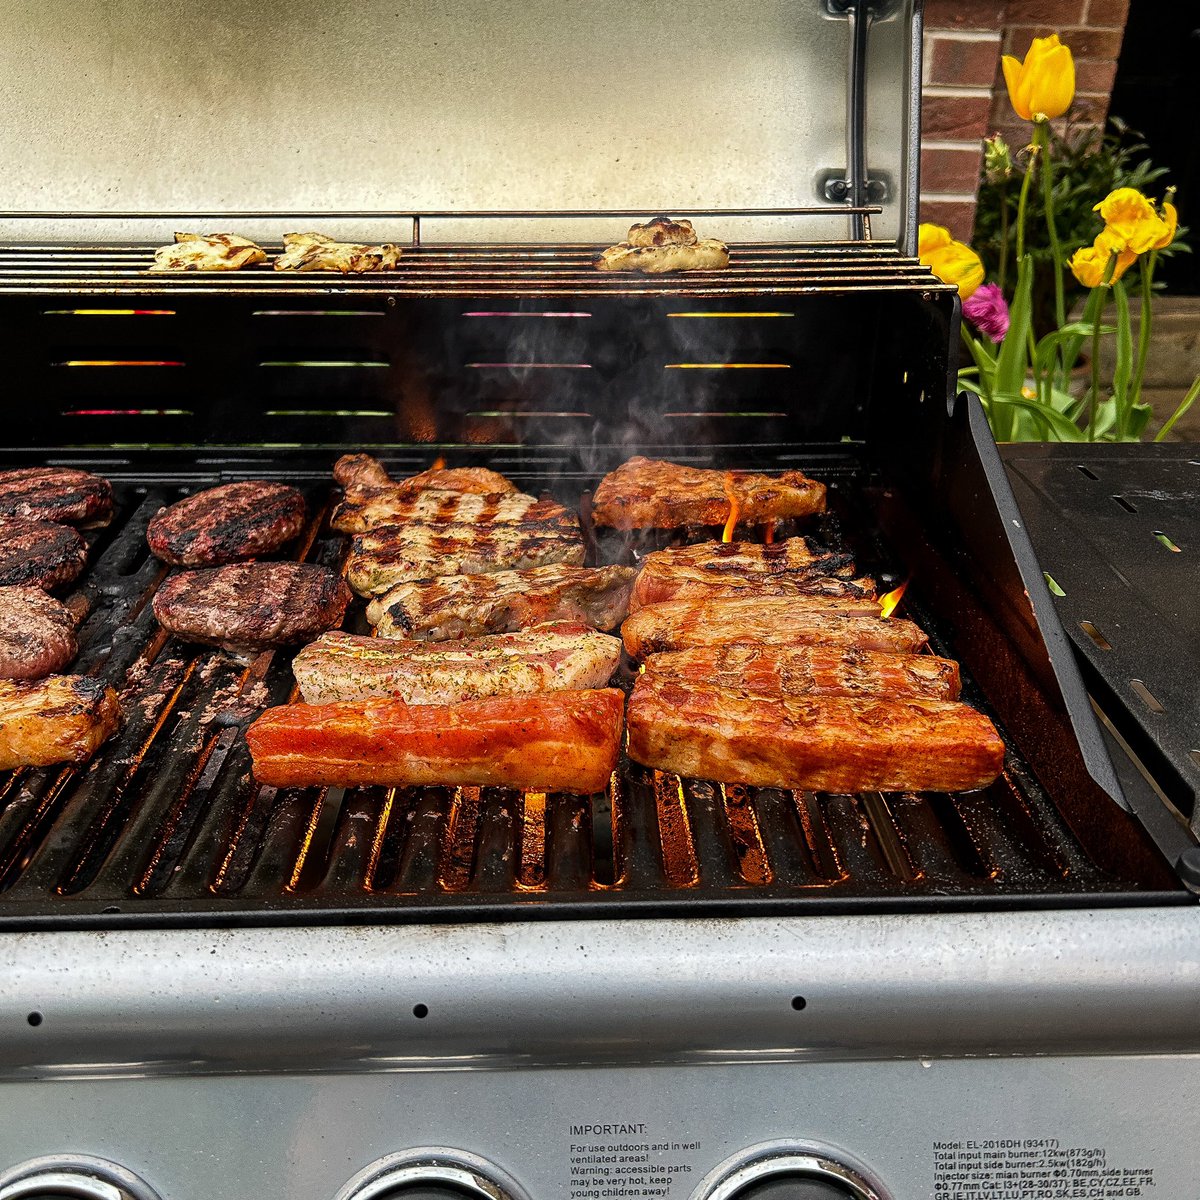 A chilled Sunday for #UppinghamWestBank today with the Paarlauff postponed due to rain. But some light revision this evening for our 5th Form, cage cricket for the #Uppingham4thform and a quick BBQ for the U5th to break up the revision slog #UppinghamBoarding #SummerTerm #BBQ🥩🍔